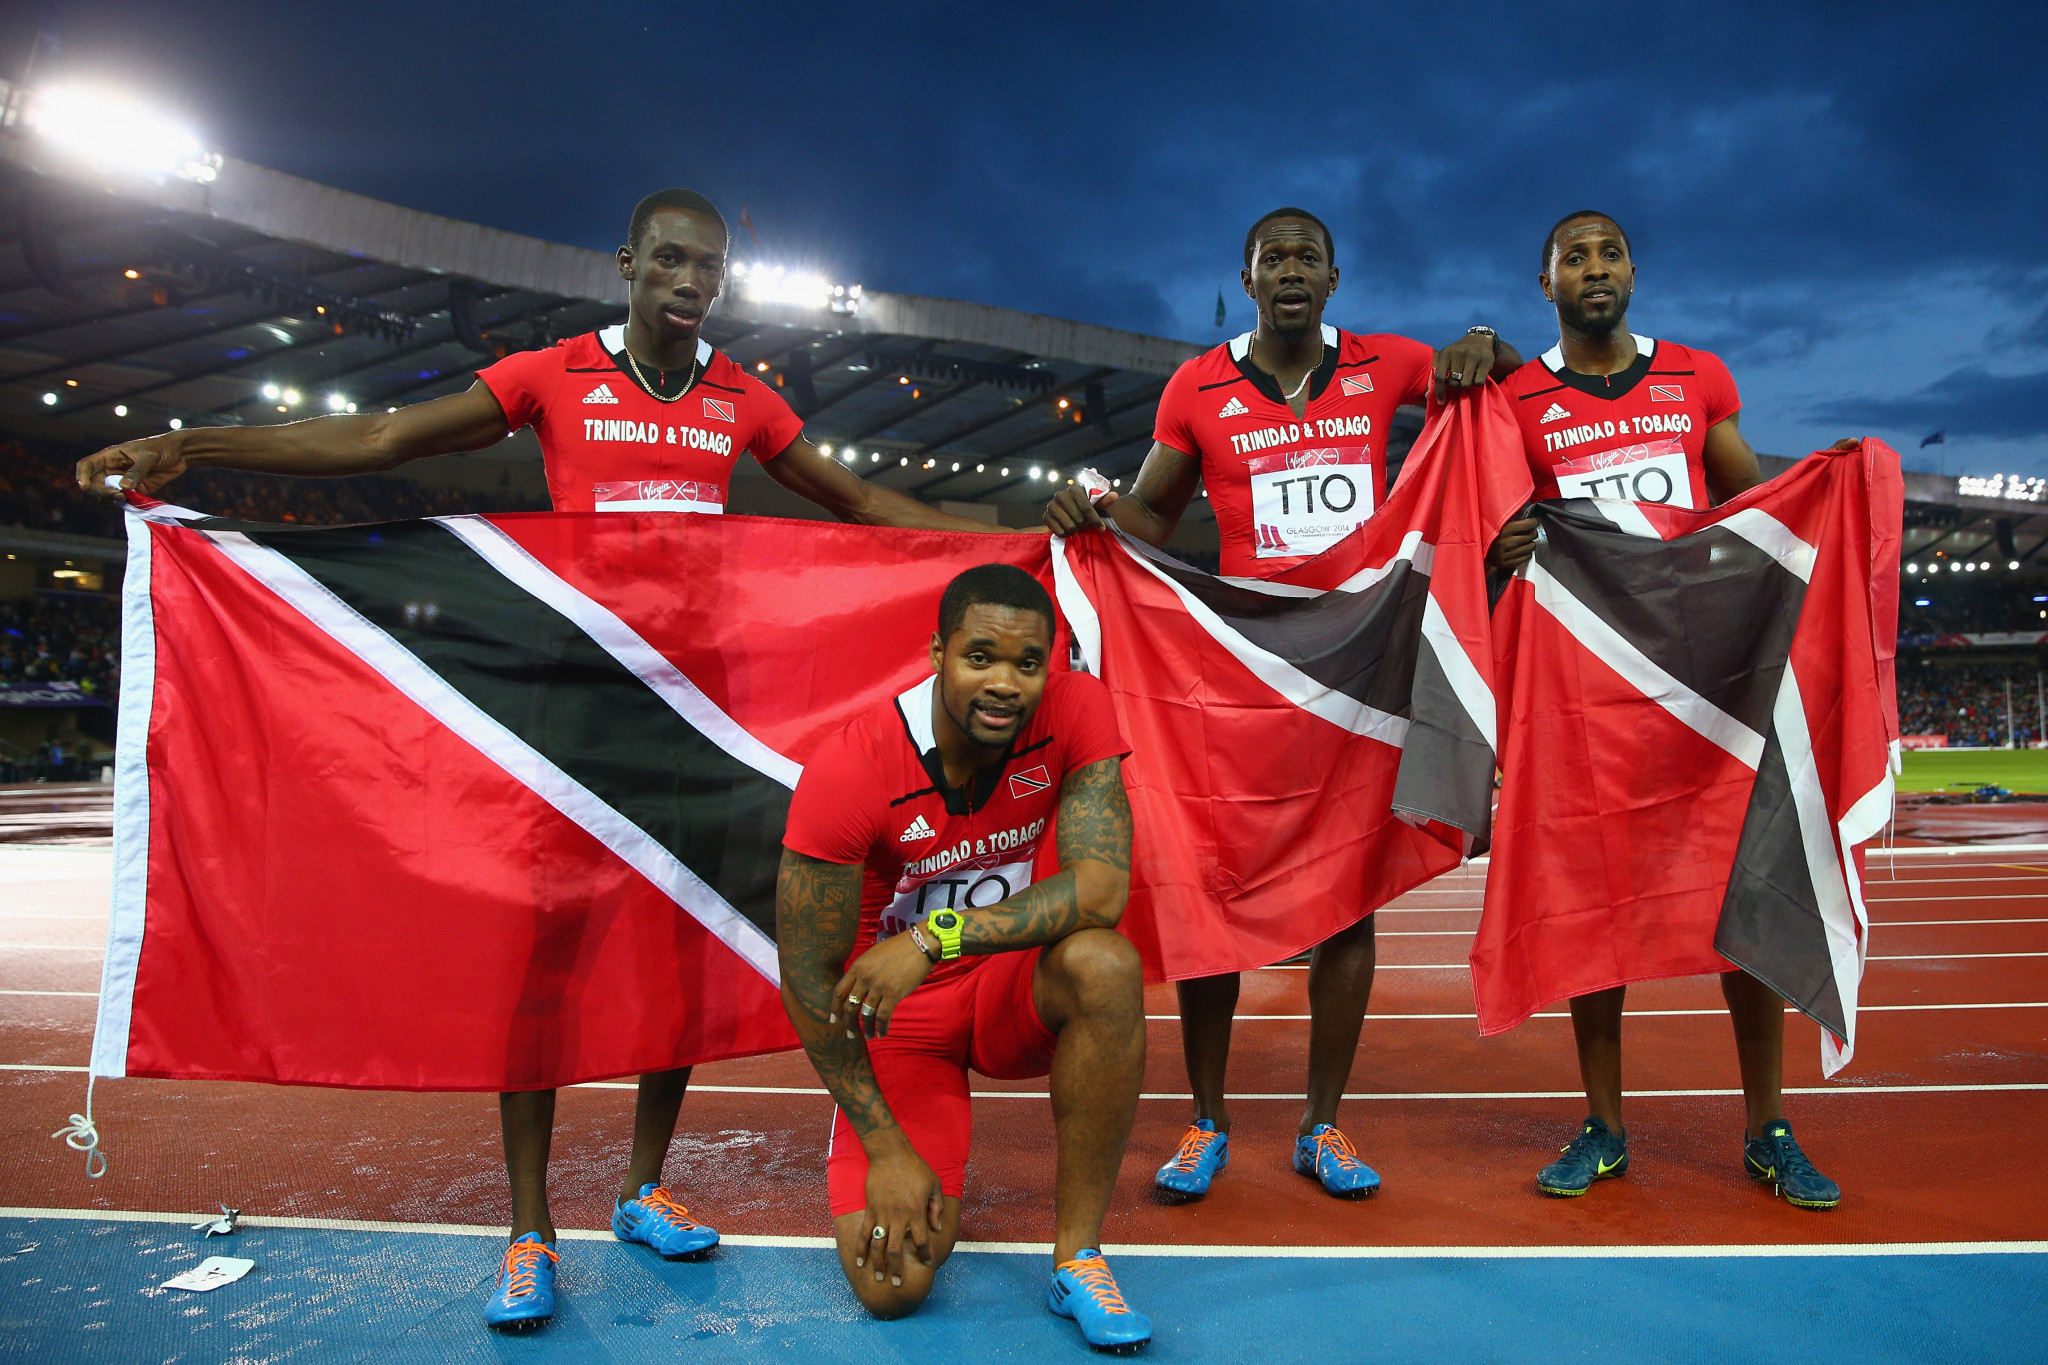 Trinidad and Tobago will aim to improve on their Glasgow 2014 Commonwealth Games haul in Gold Coast ©Getty Images